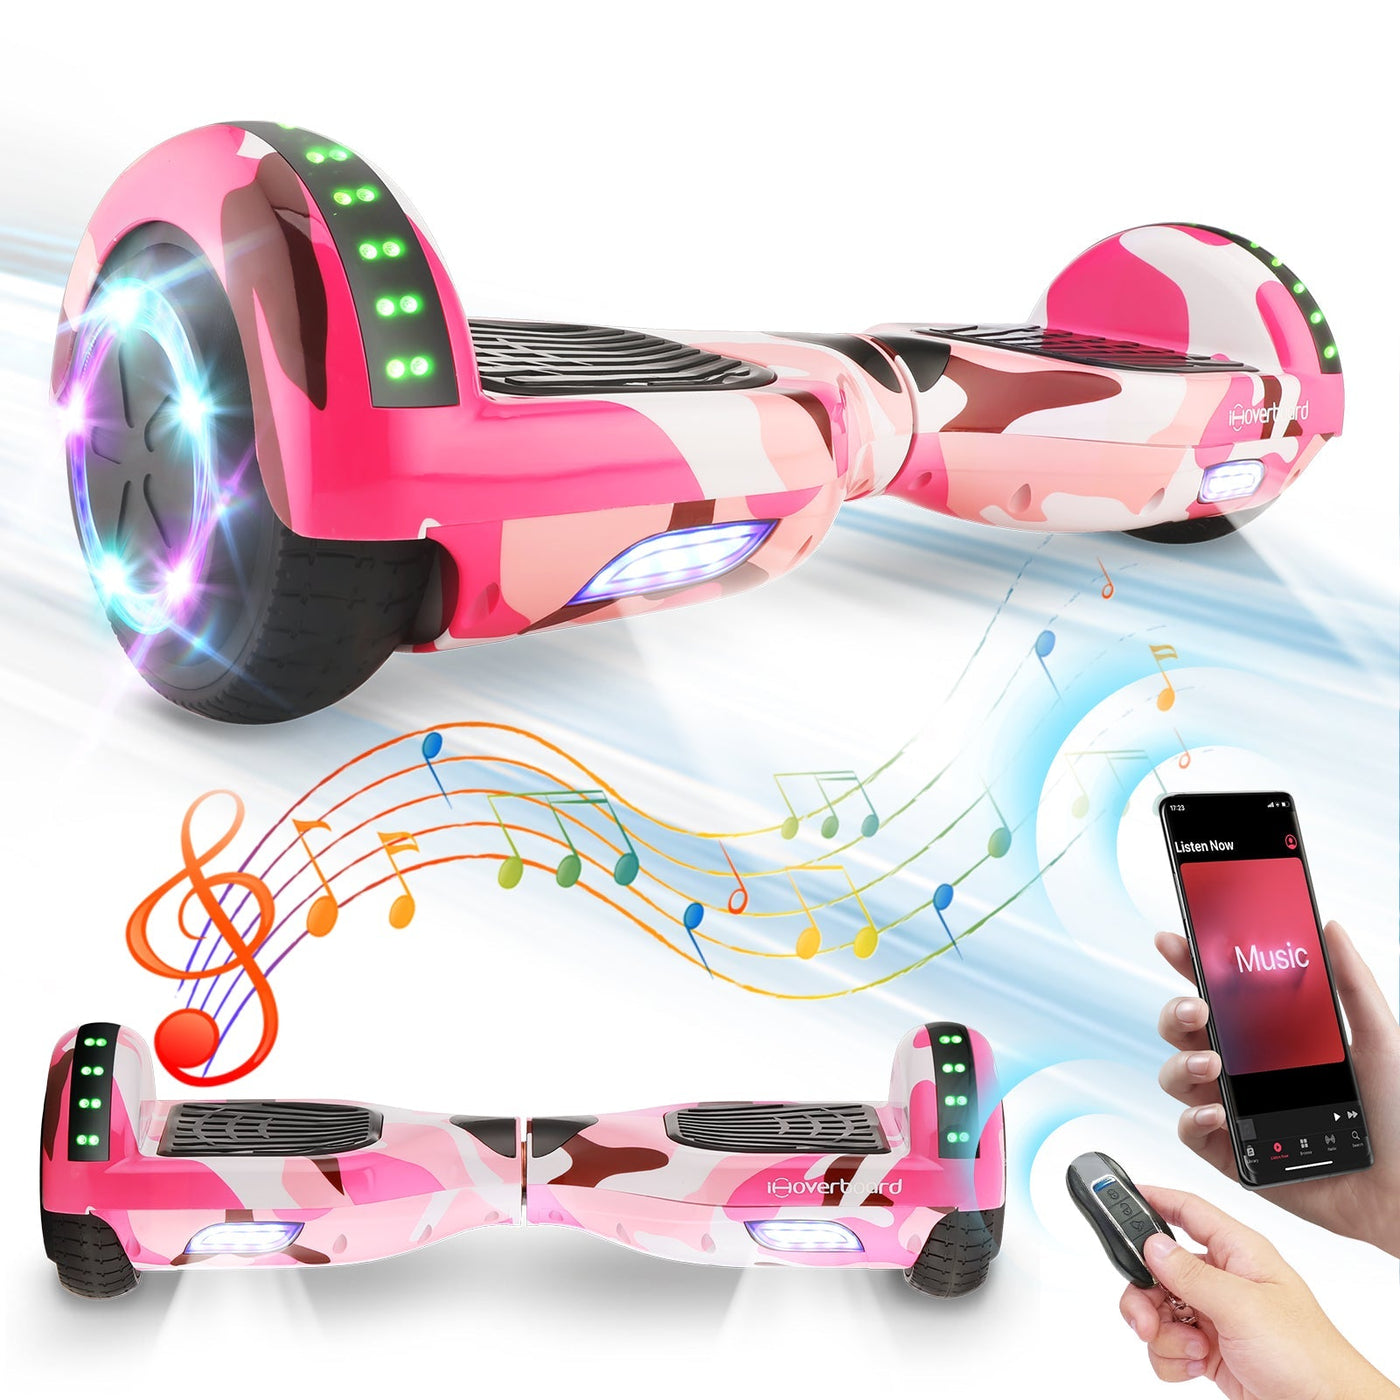 H1 Hot Pink 700-W-Motor LED Balance Hoverboard Bluetooth 6.5"